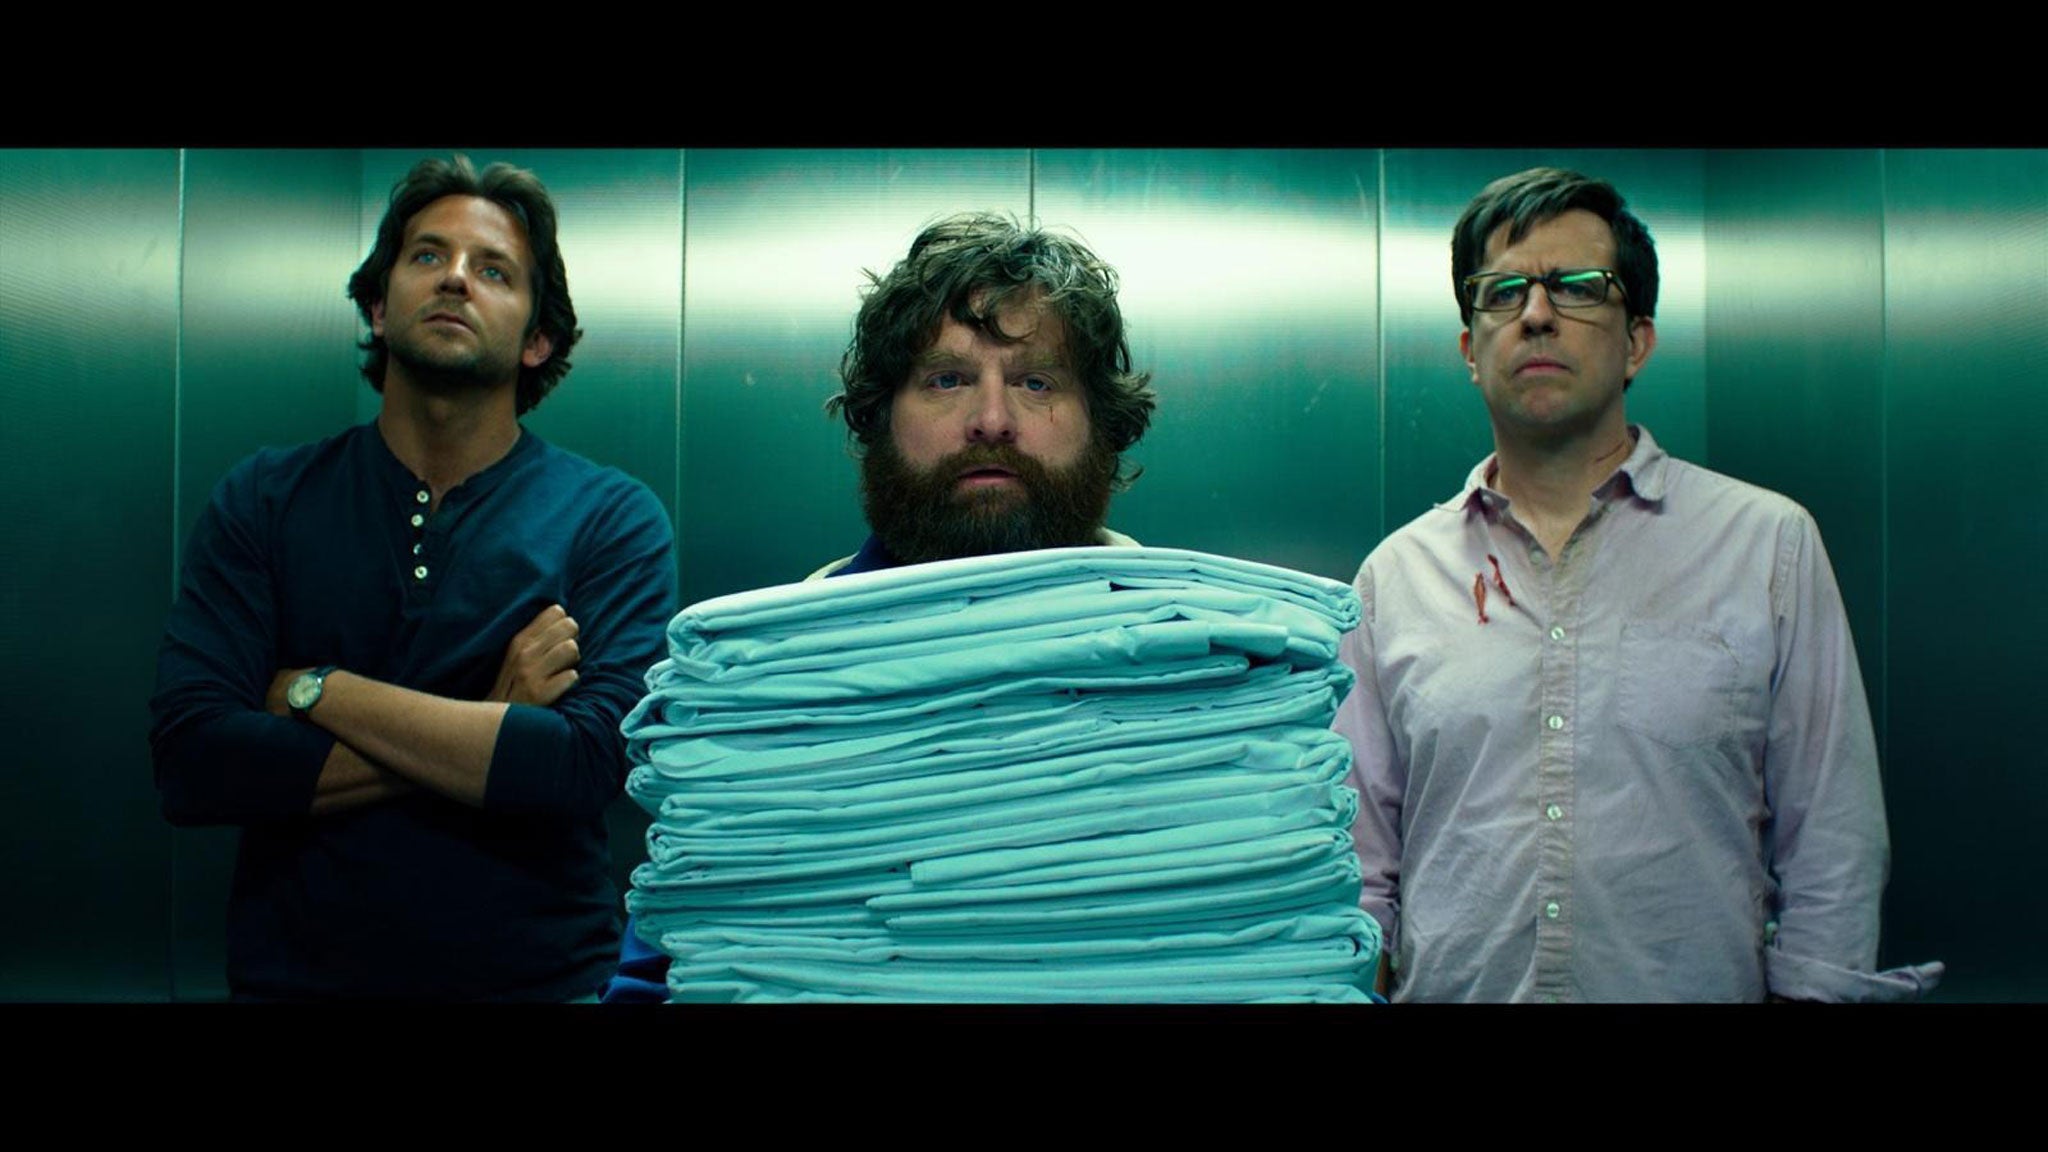 The Hangover Part III 24 May Comedy with a following this big means block- buster, with Bradley Cooper and co getting insensibly drunk (again)